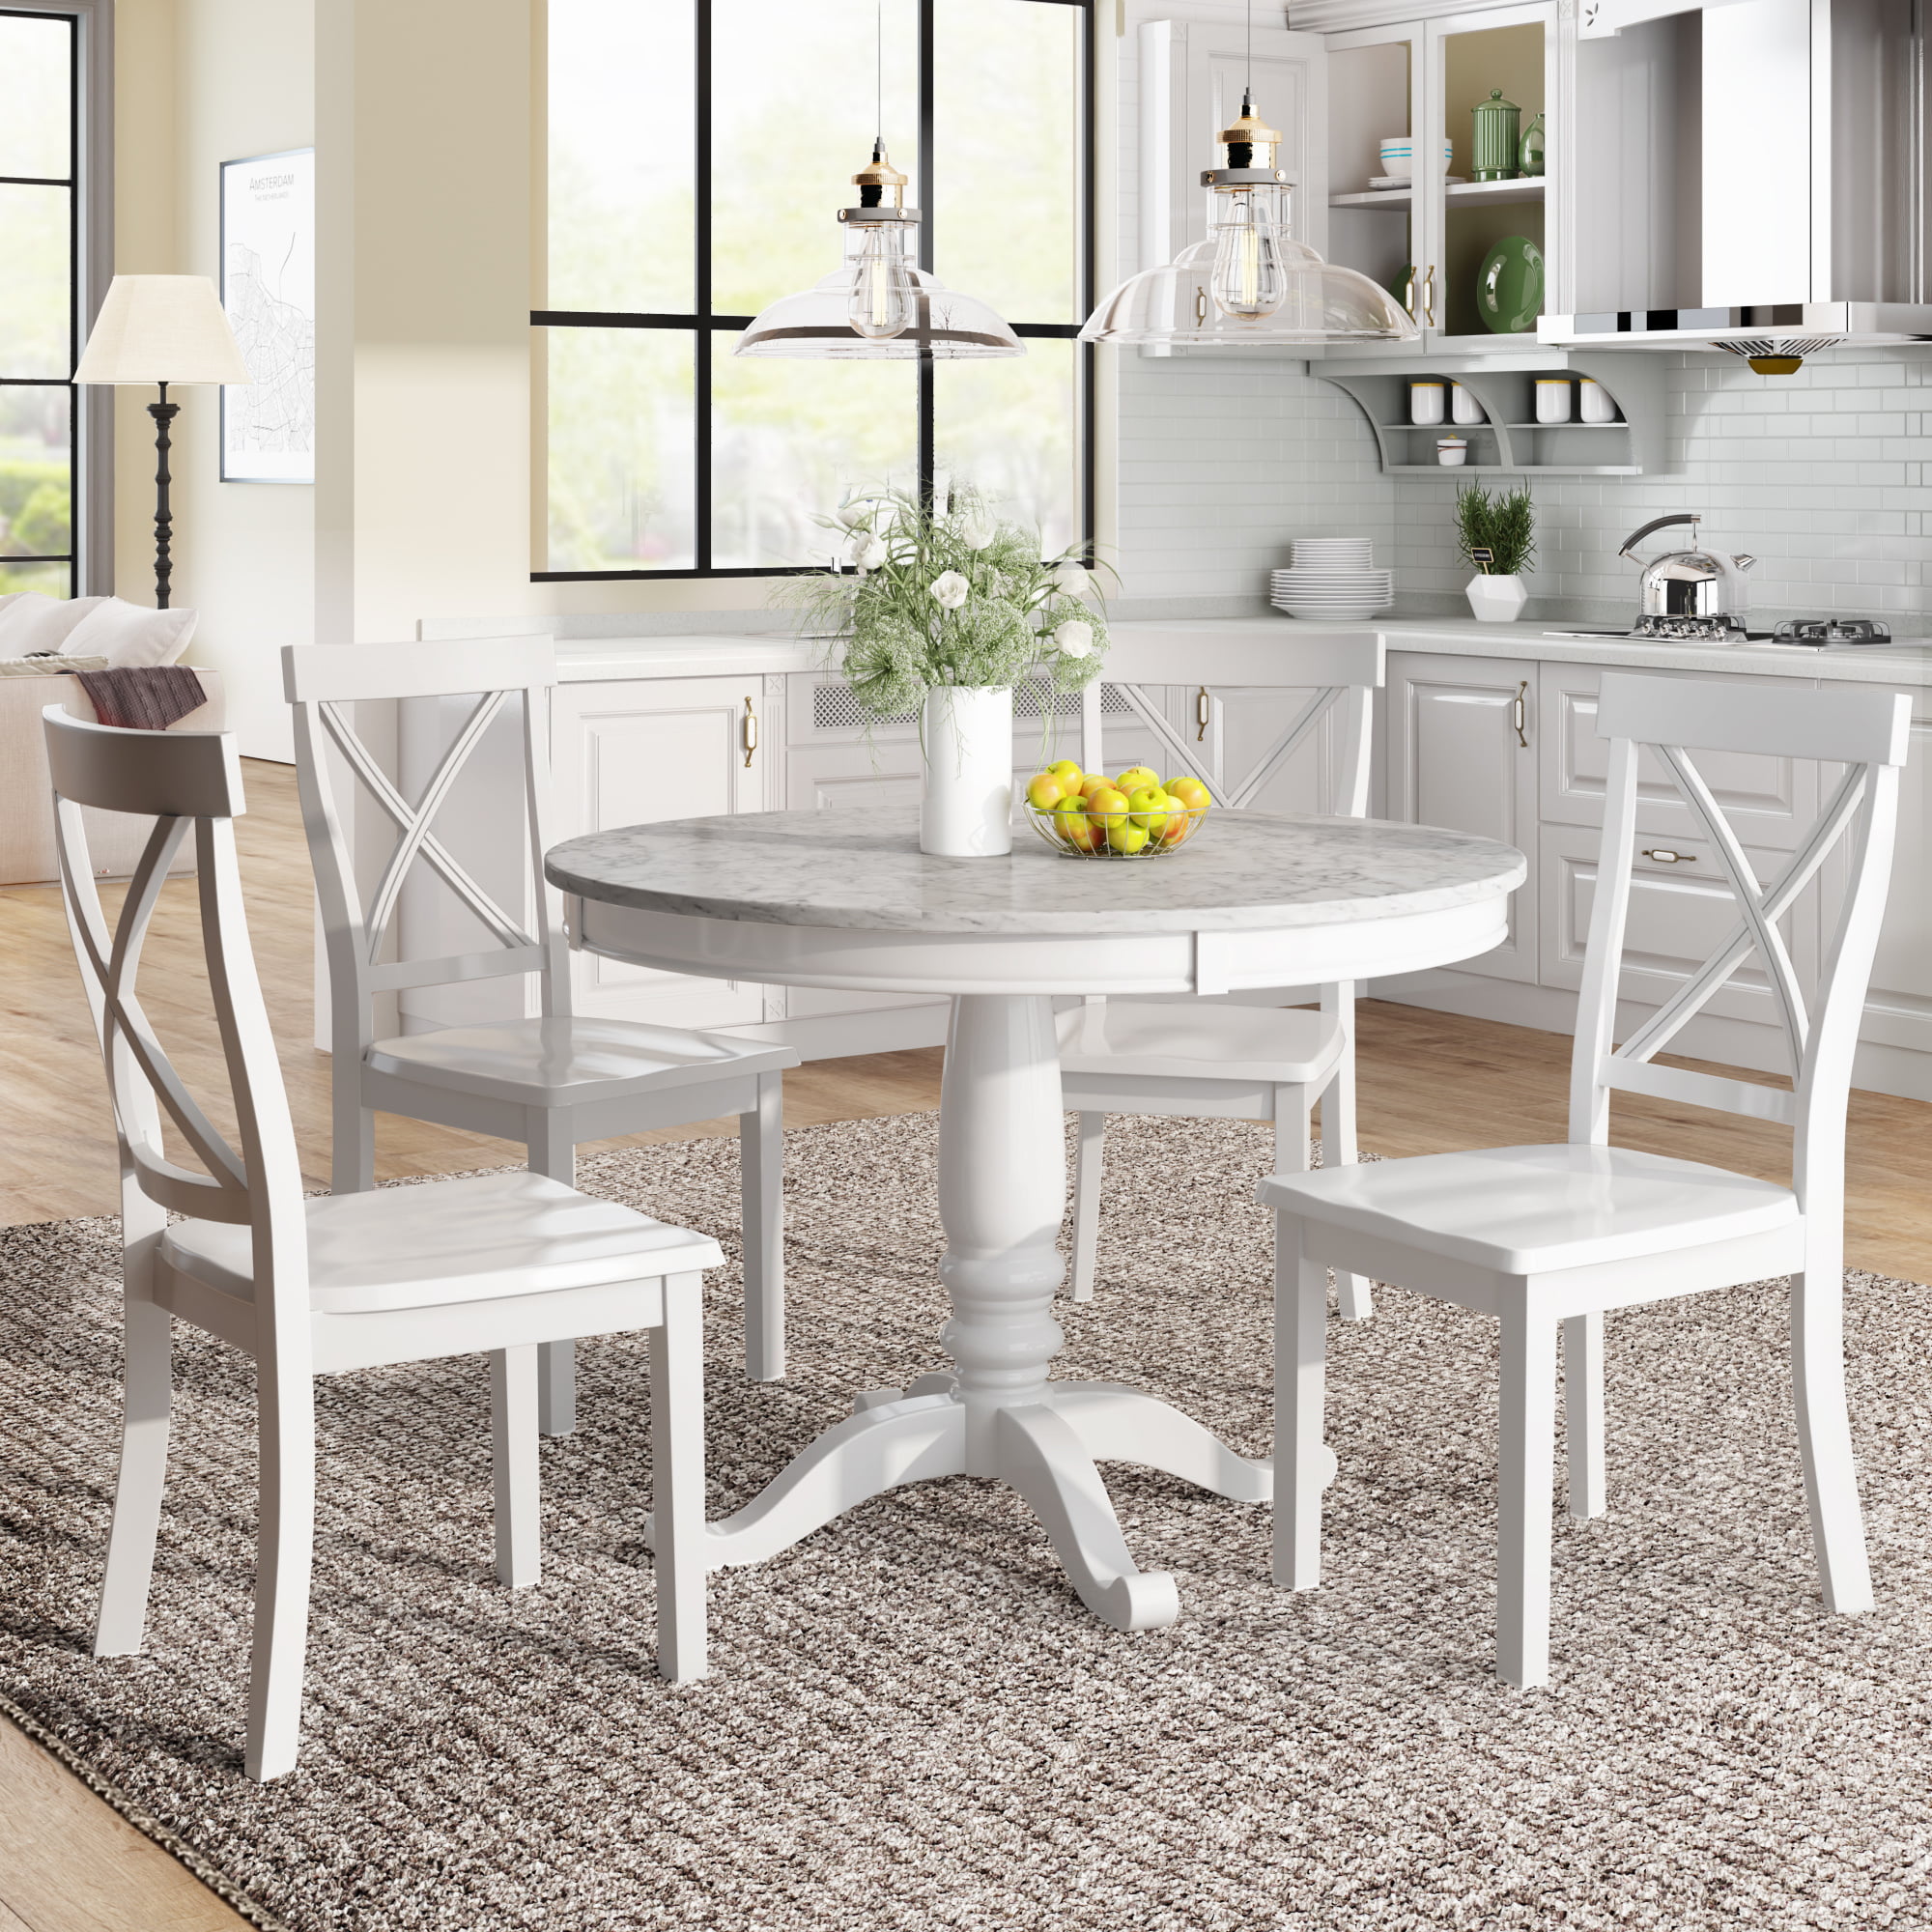 5 PCS Dining Table and 4 Chairs Set For Kitchen Dining Room Furniture White 